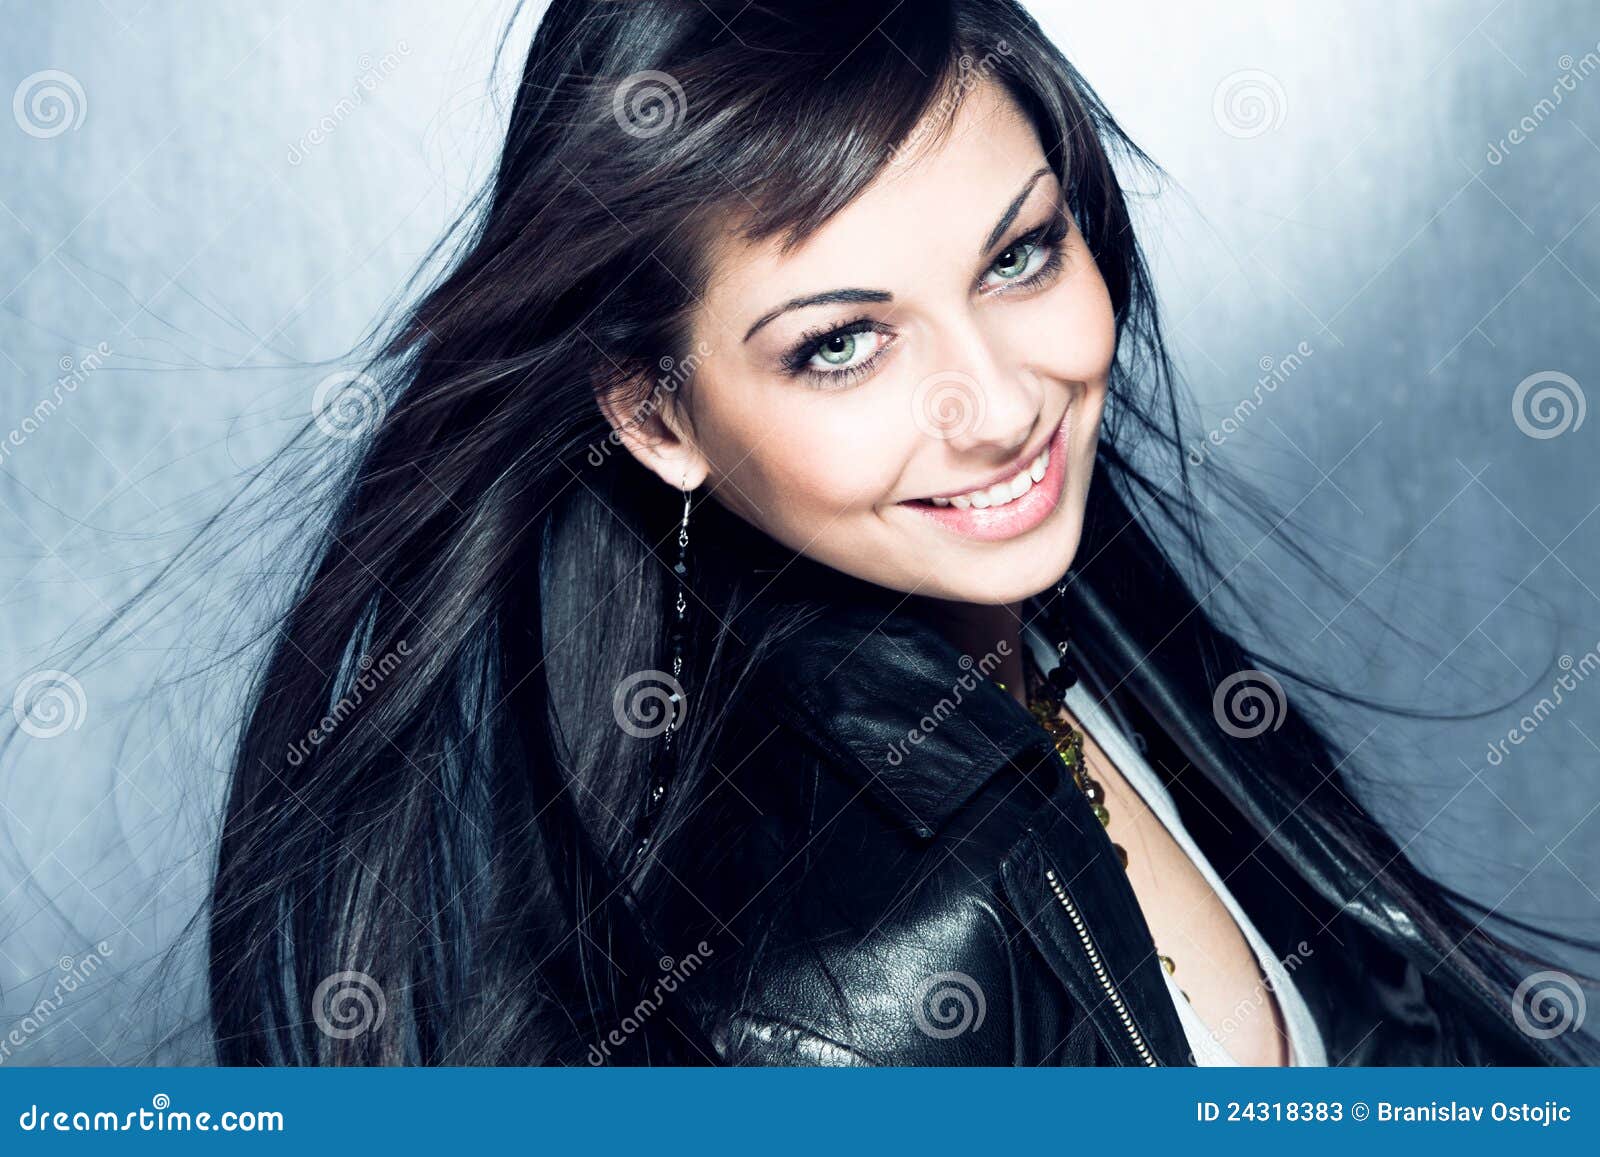 Smiling Long Black Hair Girl With Blue Eyes Stock Image Image Of